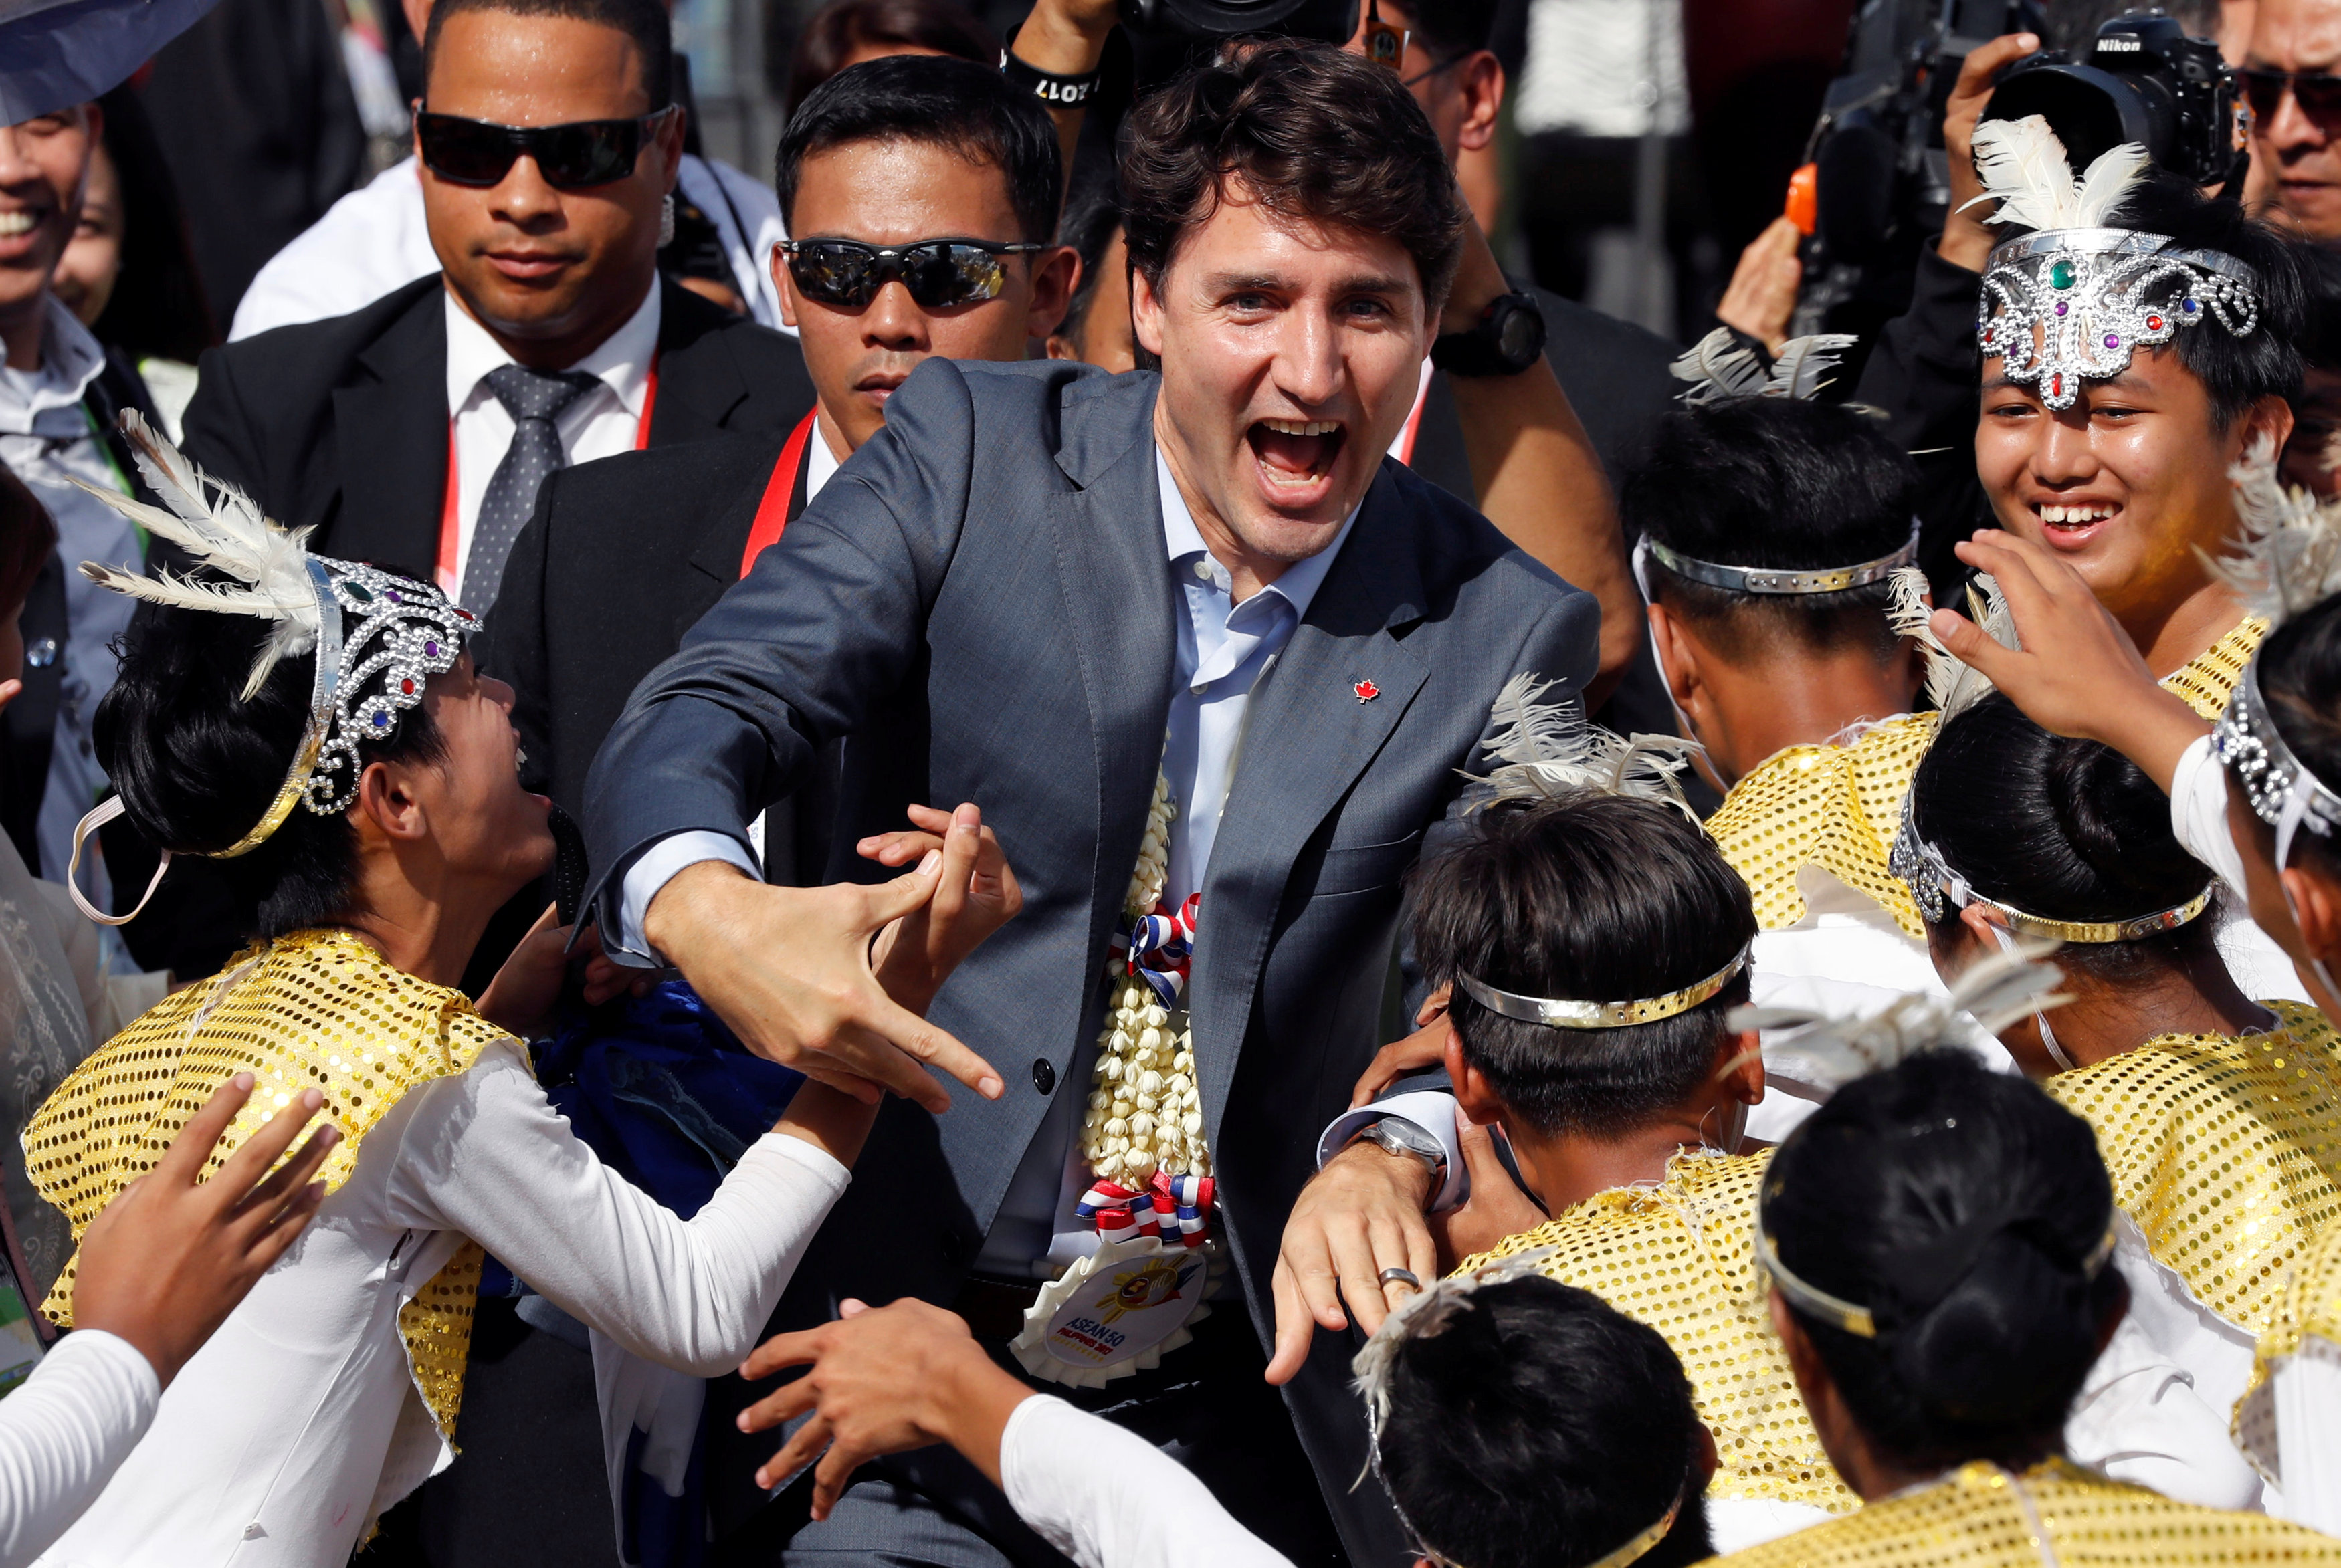 Canada's Prime Minister Justin Trudeau charms Manila while ordering fried chicken